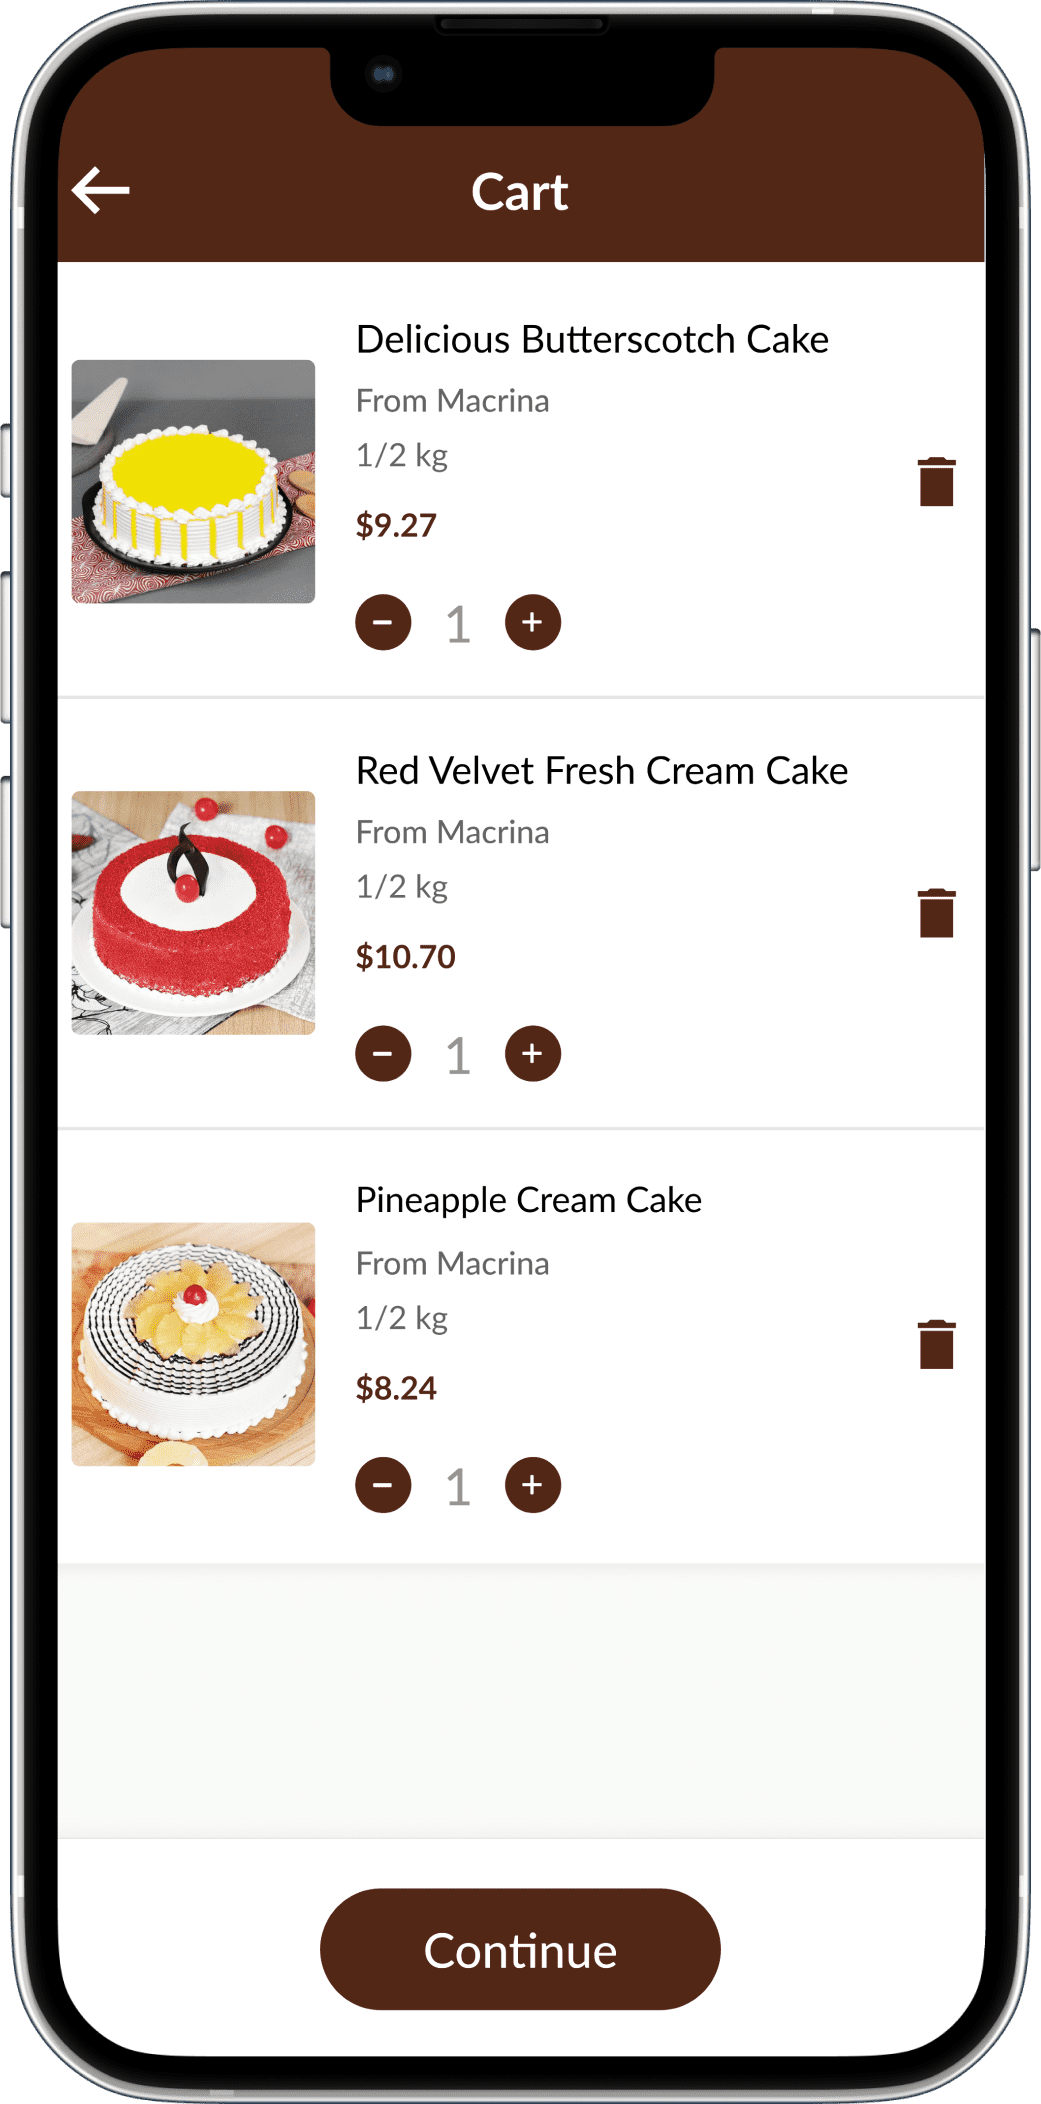 Cake Delivery App Cart screen